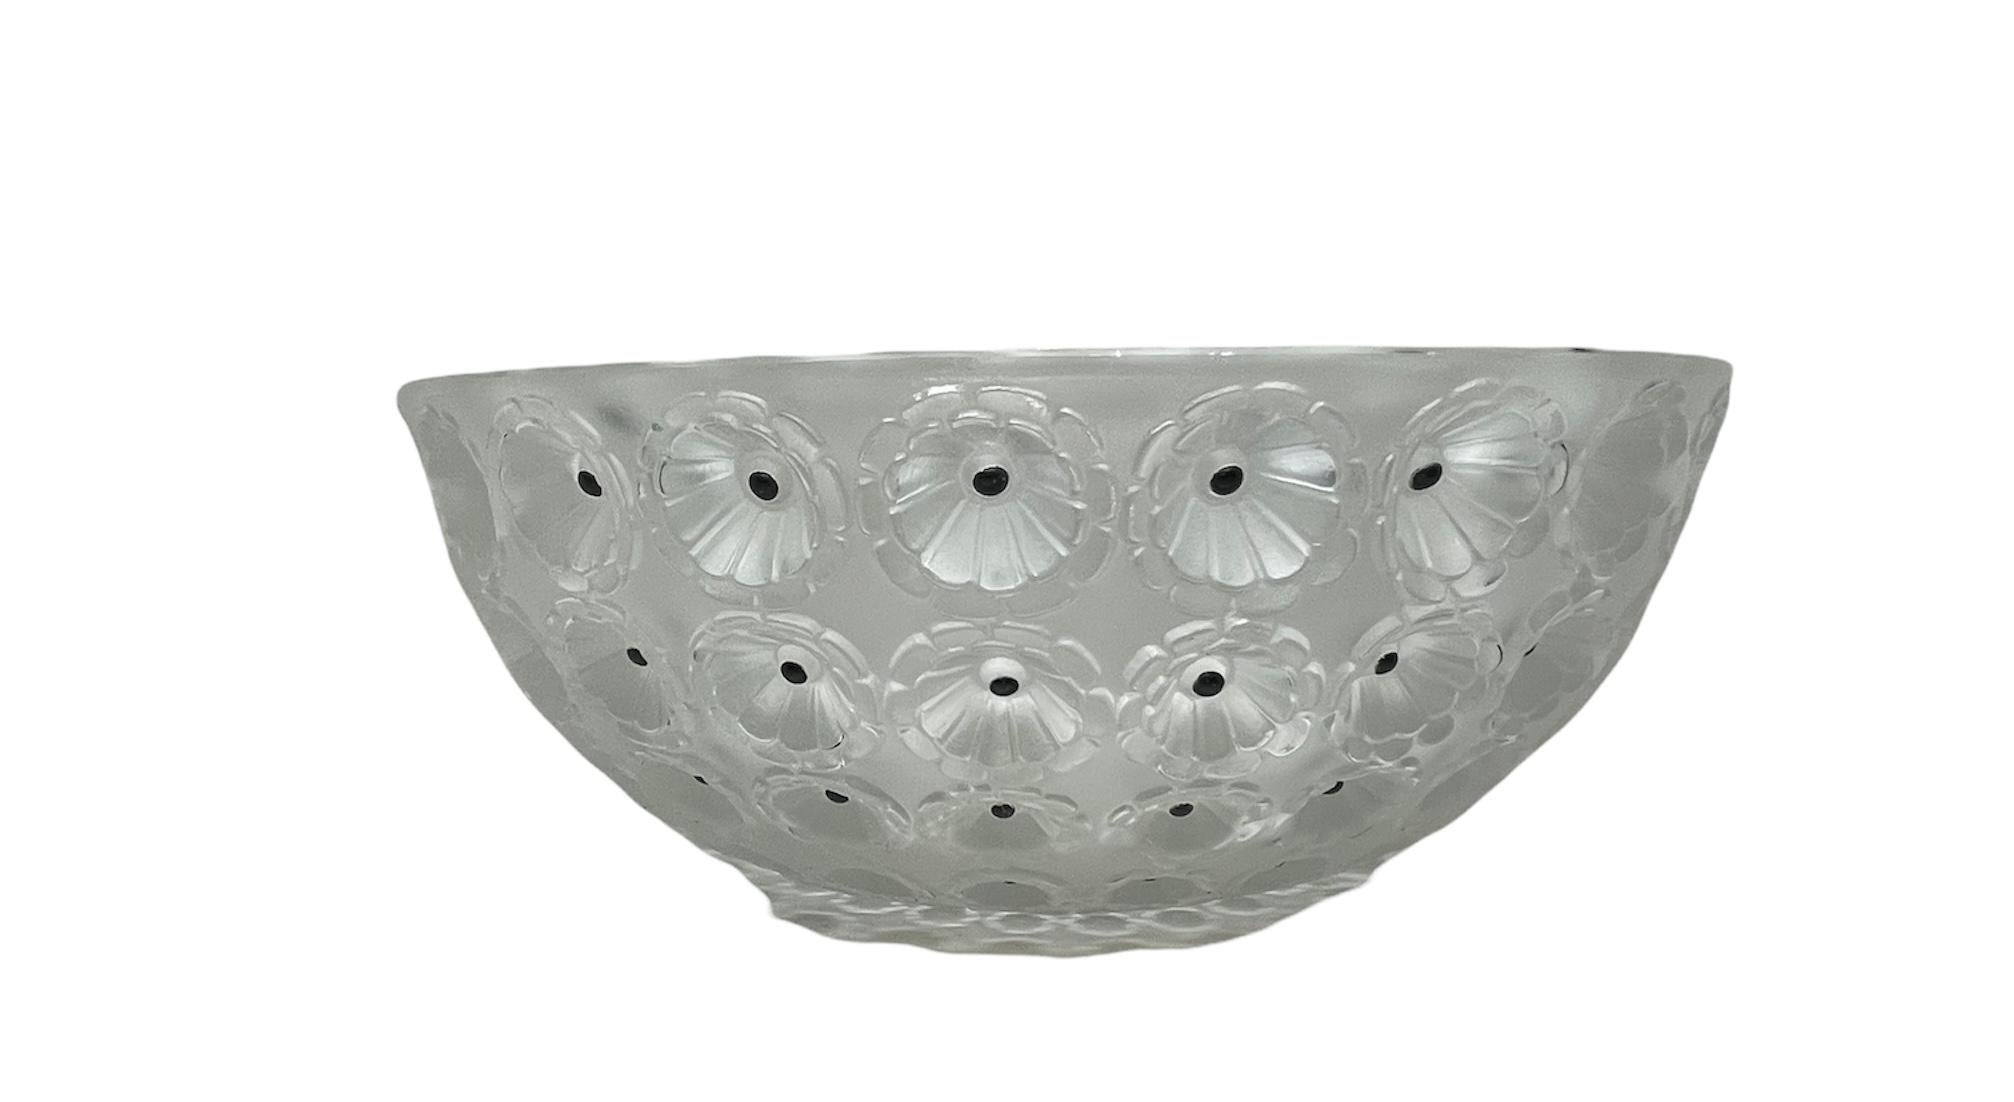 This is a Lalique Nemours crystal bowl. It depicts a frosted clear bowl adorned with multiples rows of flowers with enameled black center dots around it. Below the base, it is found Lalique, France hallmark.